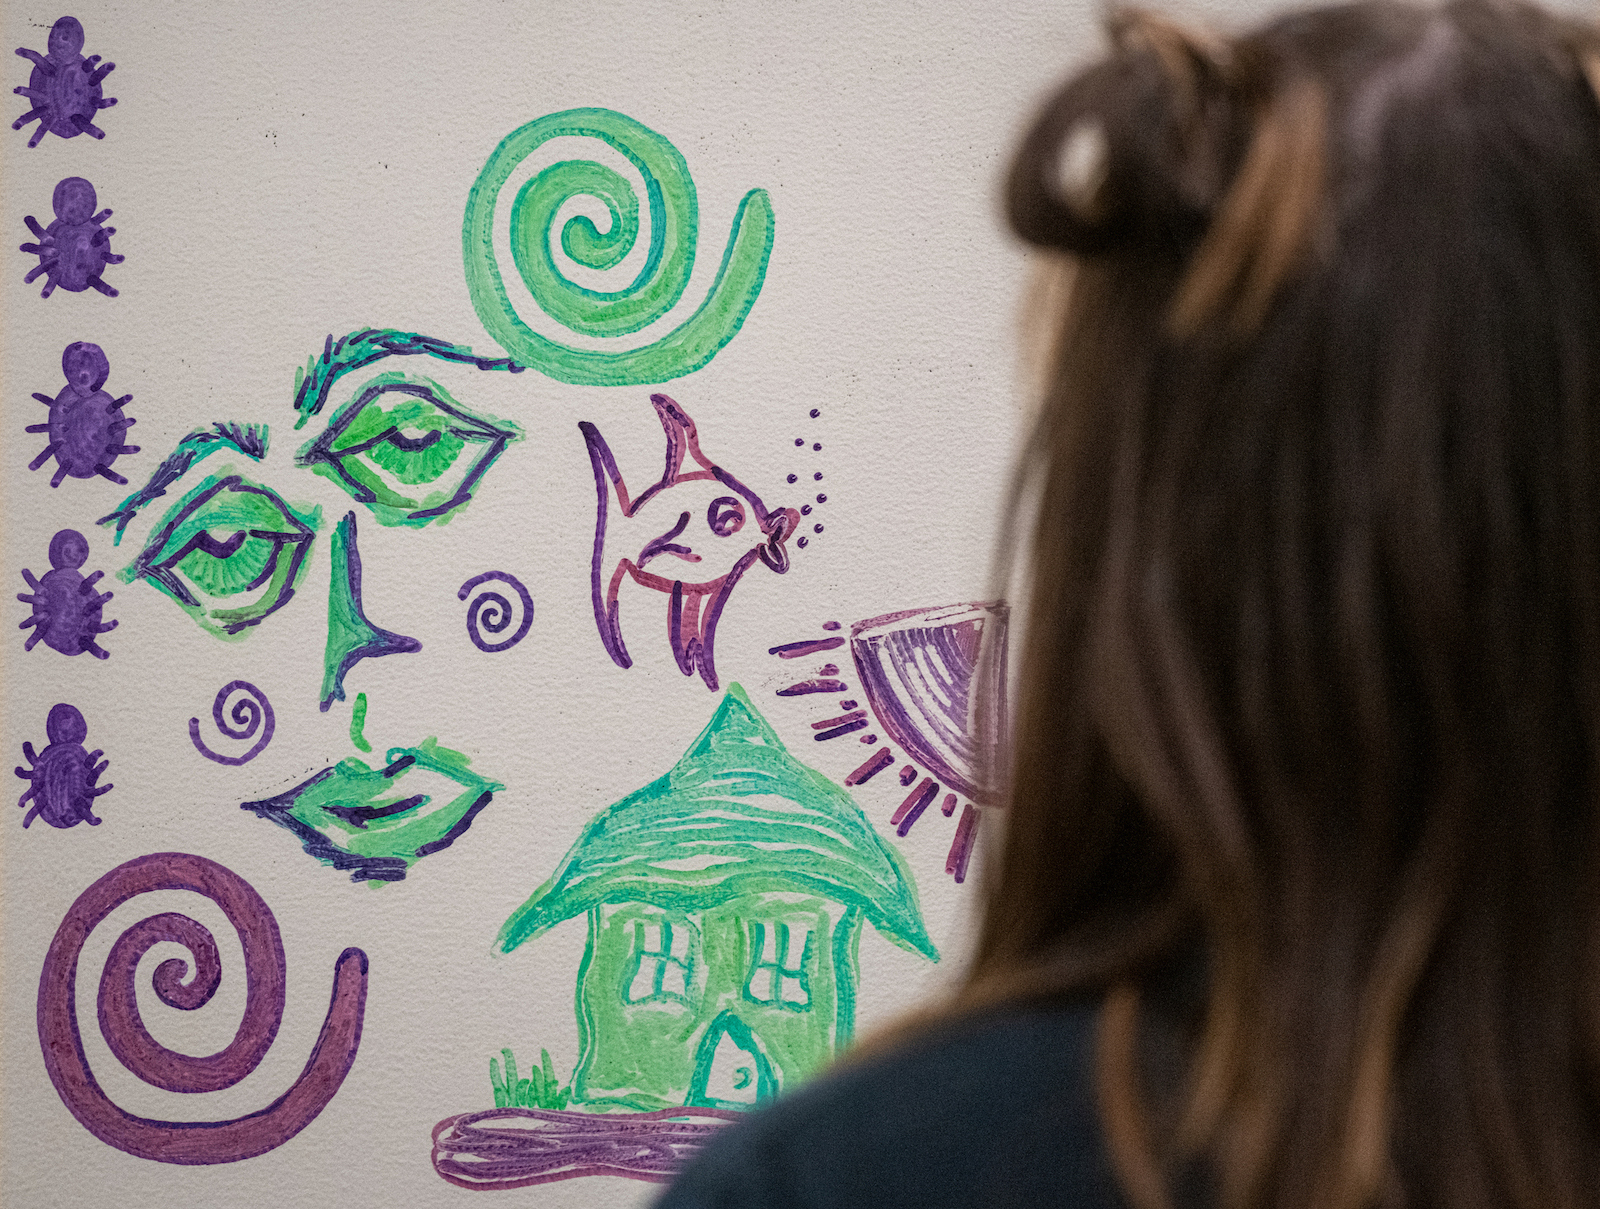 A student has her back to the camera, looking at drawing of purple swirls, spiders, a green face, a green house and more.